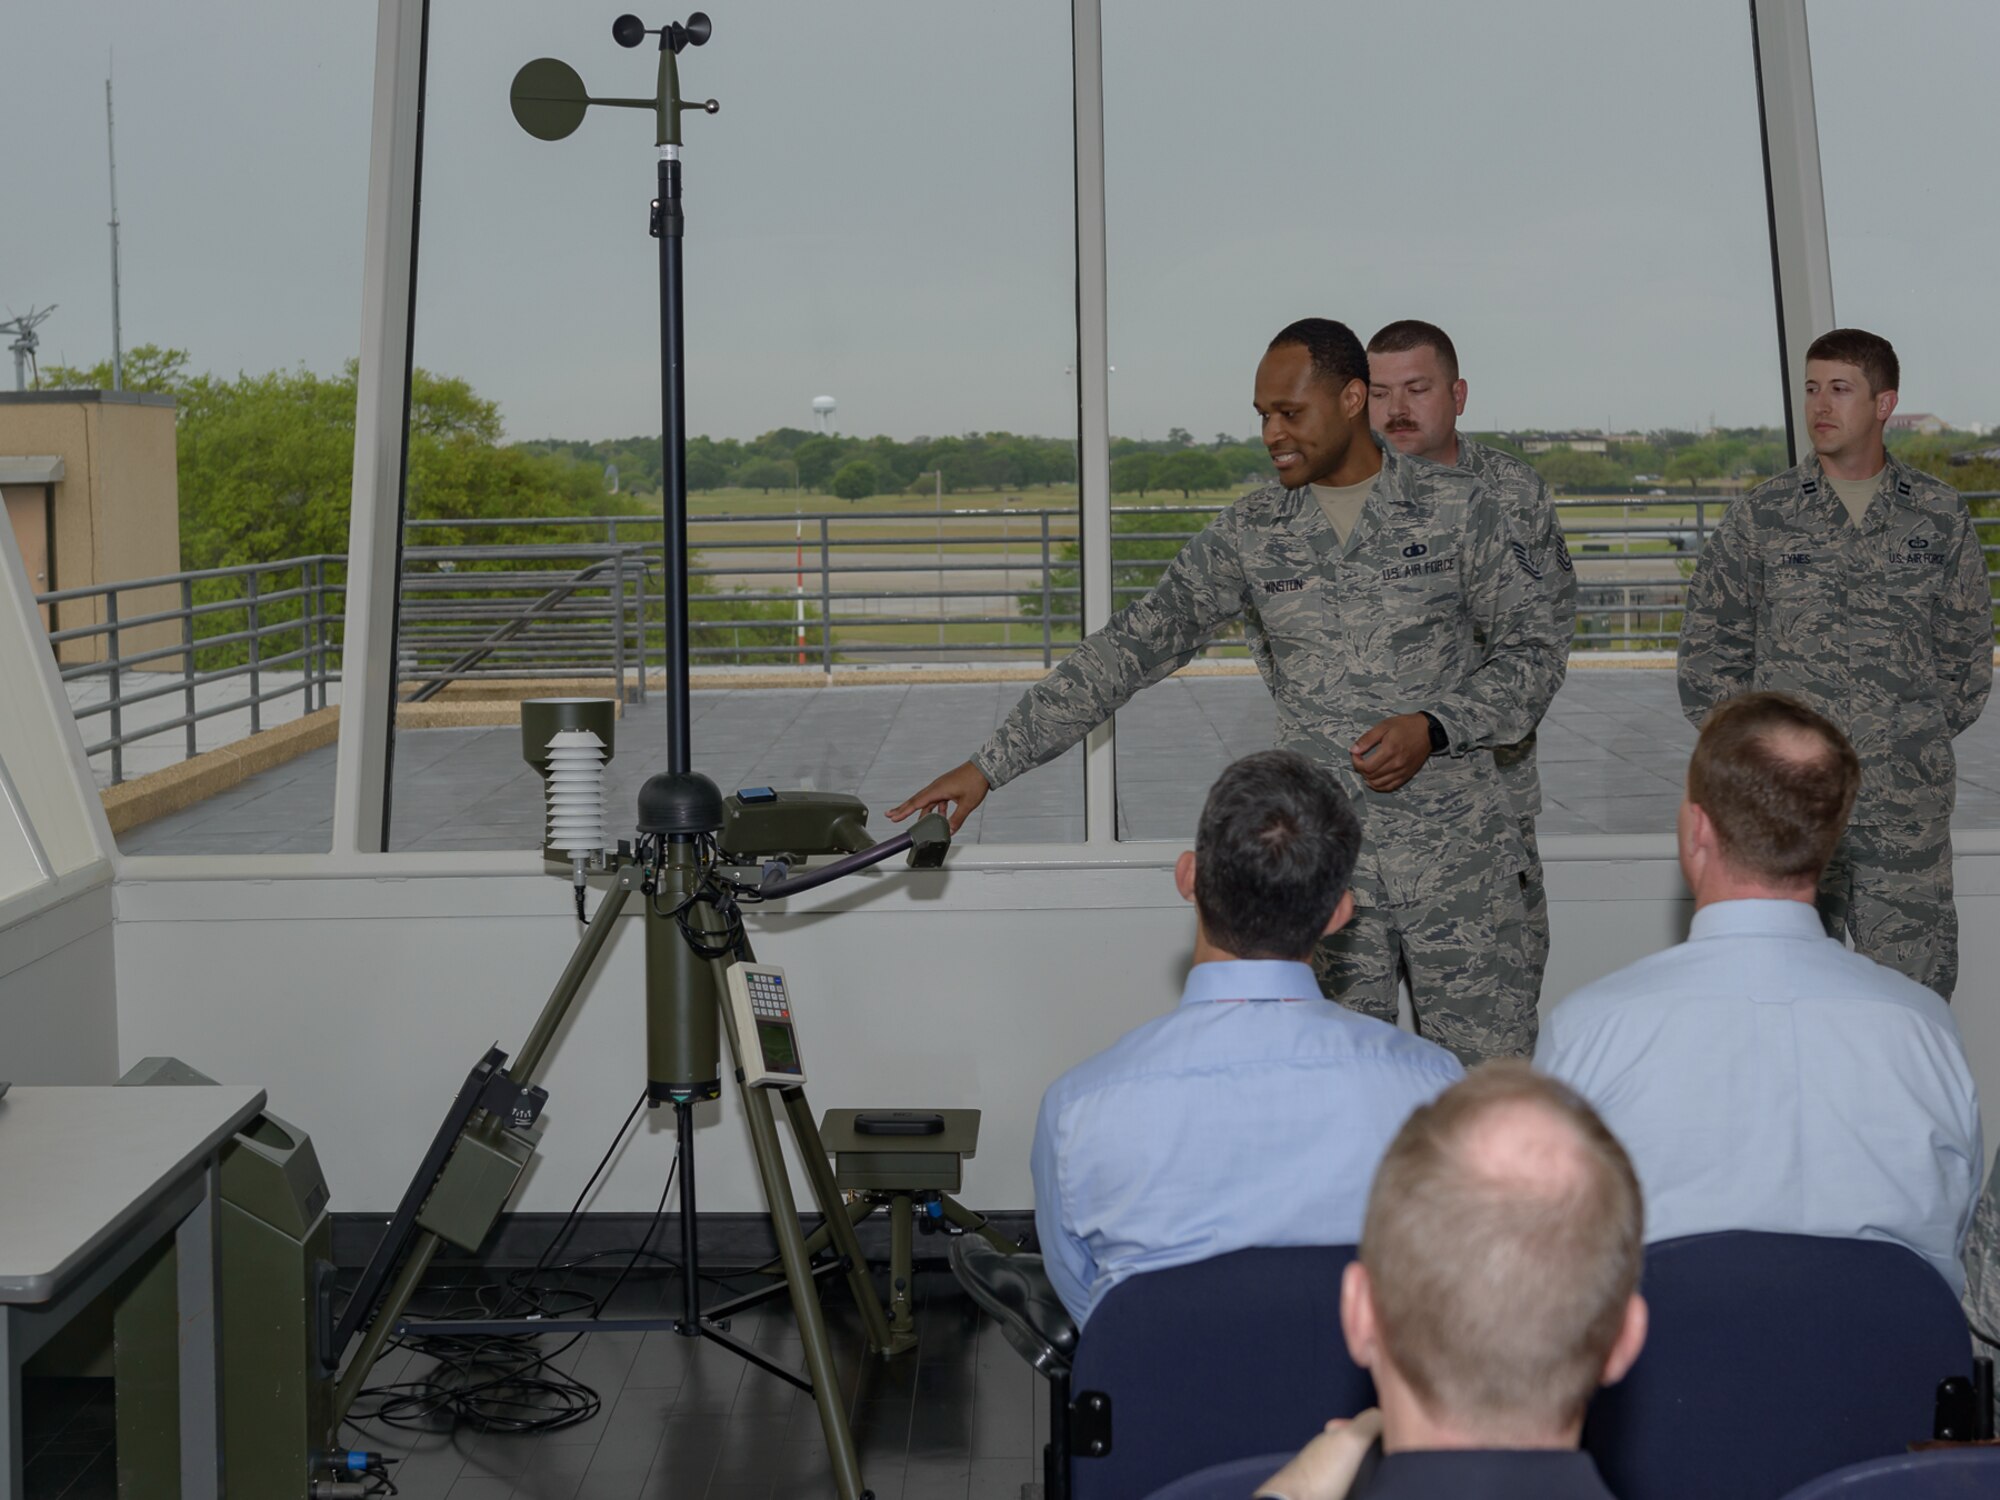 Tech Sgt. Jonathan Winston, 335th Training Squadron instructor briefs 81st Training Wing honorary commanders on the Tactical Meteorological Observing System at the Weather Training Complex, Mar. 30, 2017, on Keesler Air Force Base, Miss. The visit highlighted the training mission of the 81st Training Group for 81st TRW honorary commanders. (U.S. Air Force photo by Andre’ Askew)     